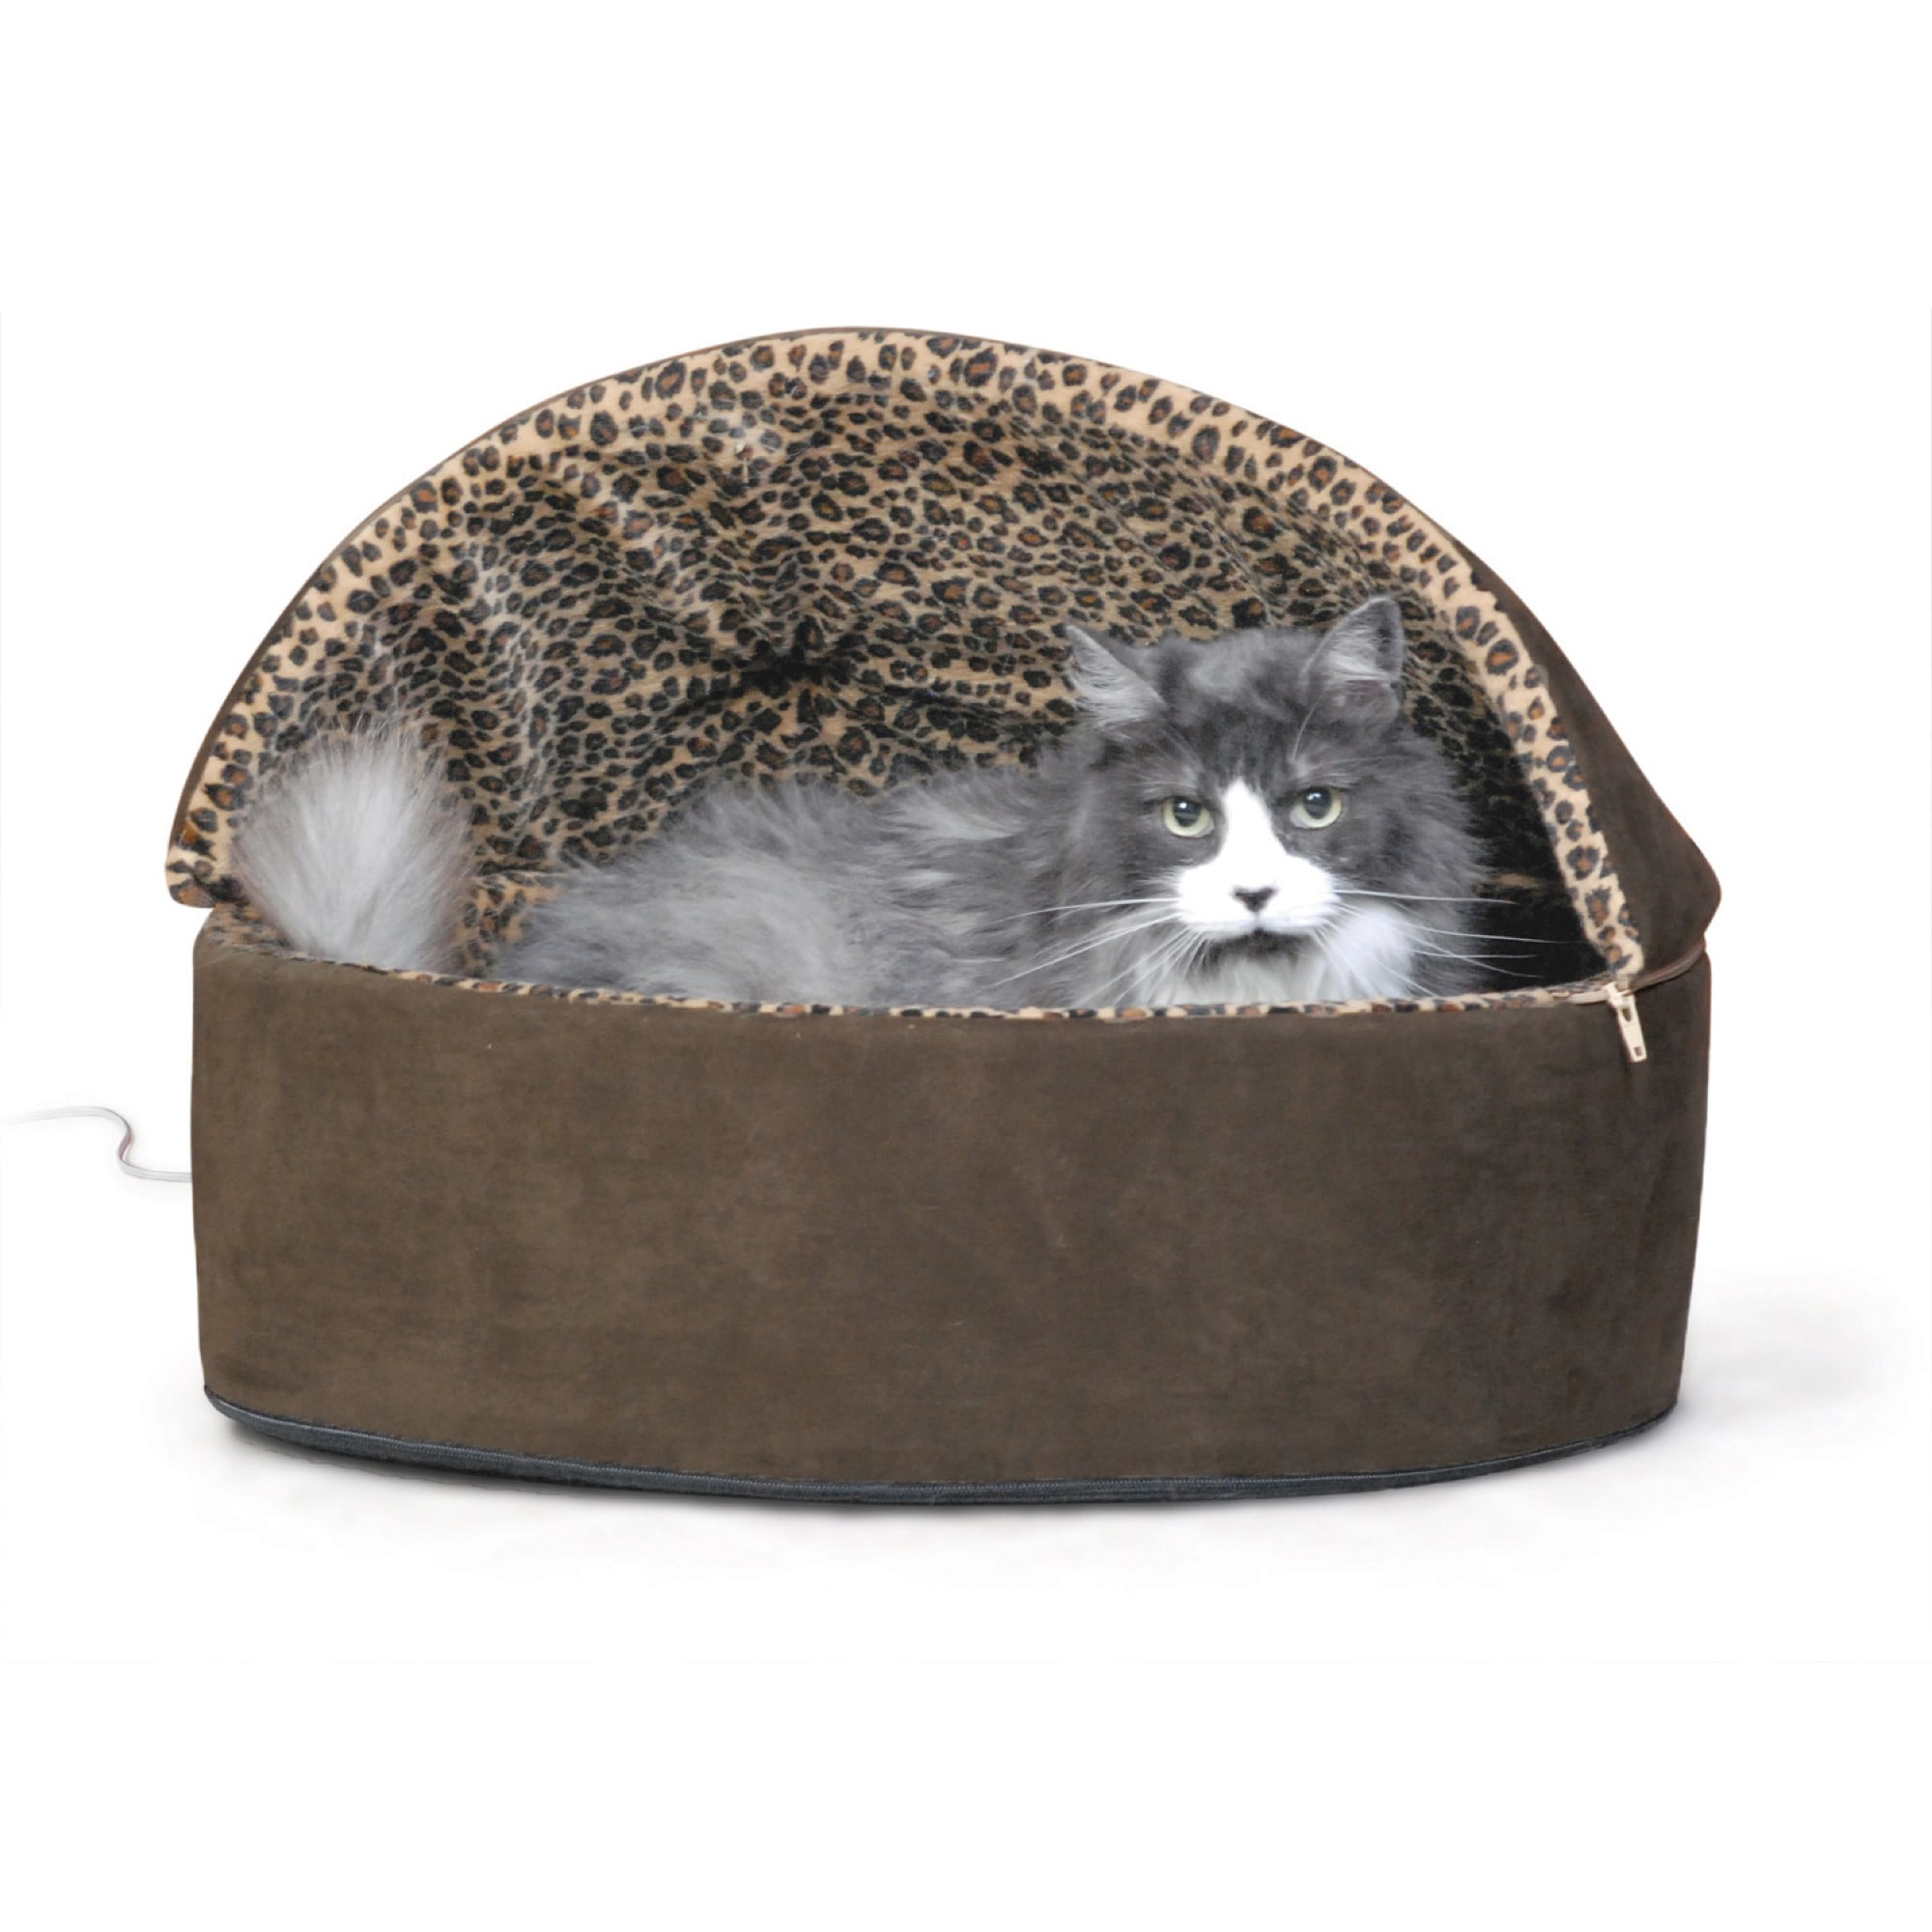 K&H Mocha Leopard Thermo-Kitty Bed Deluxe Heated Cat Bed